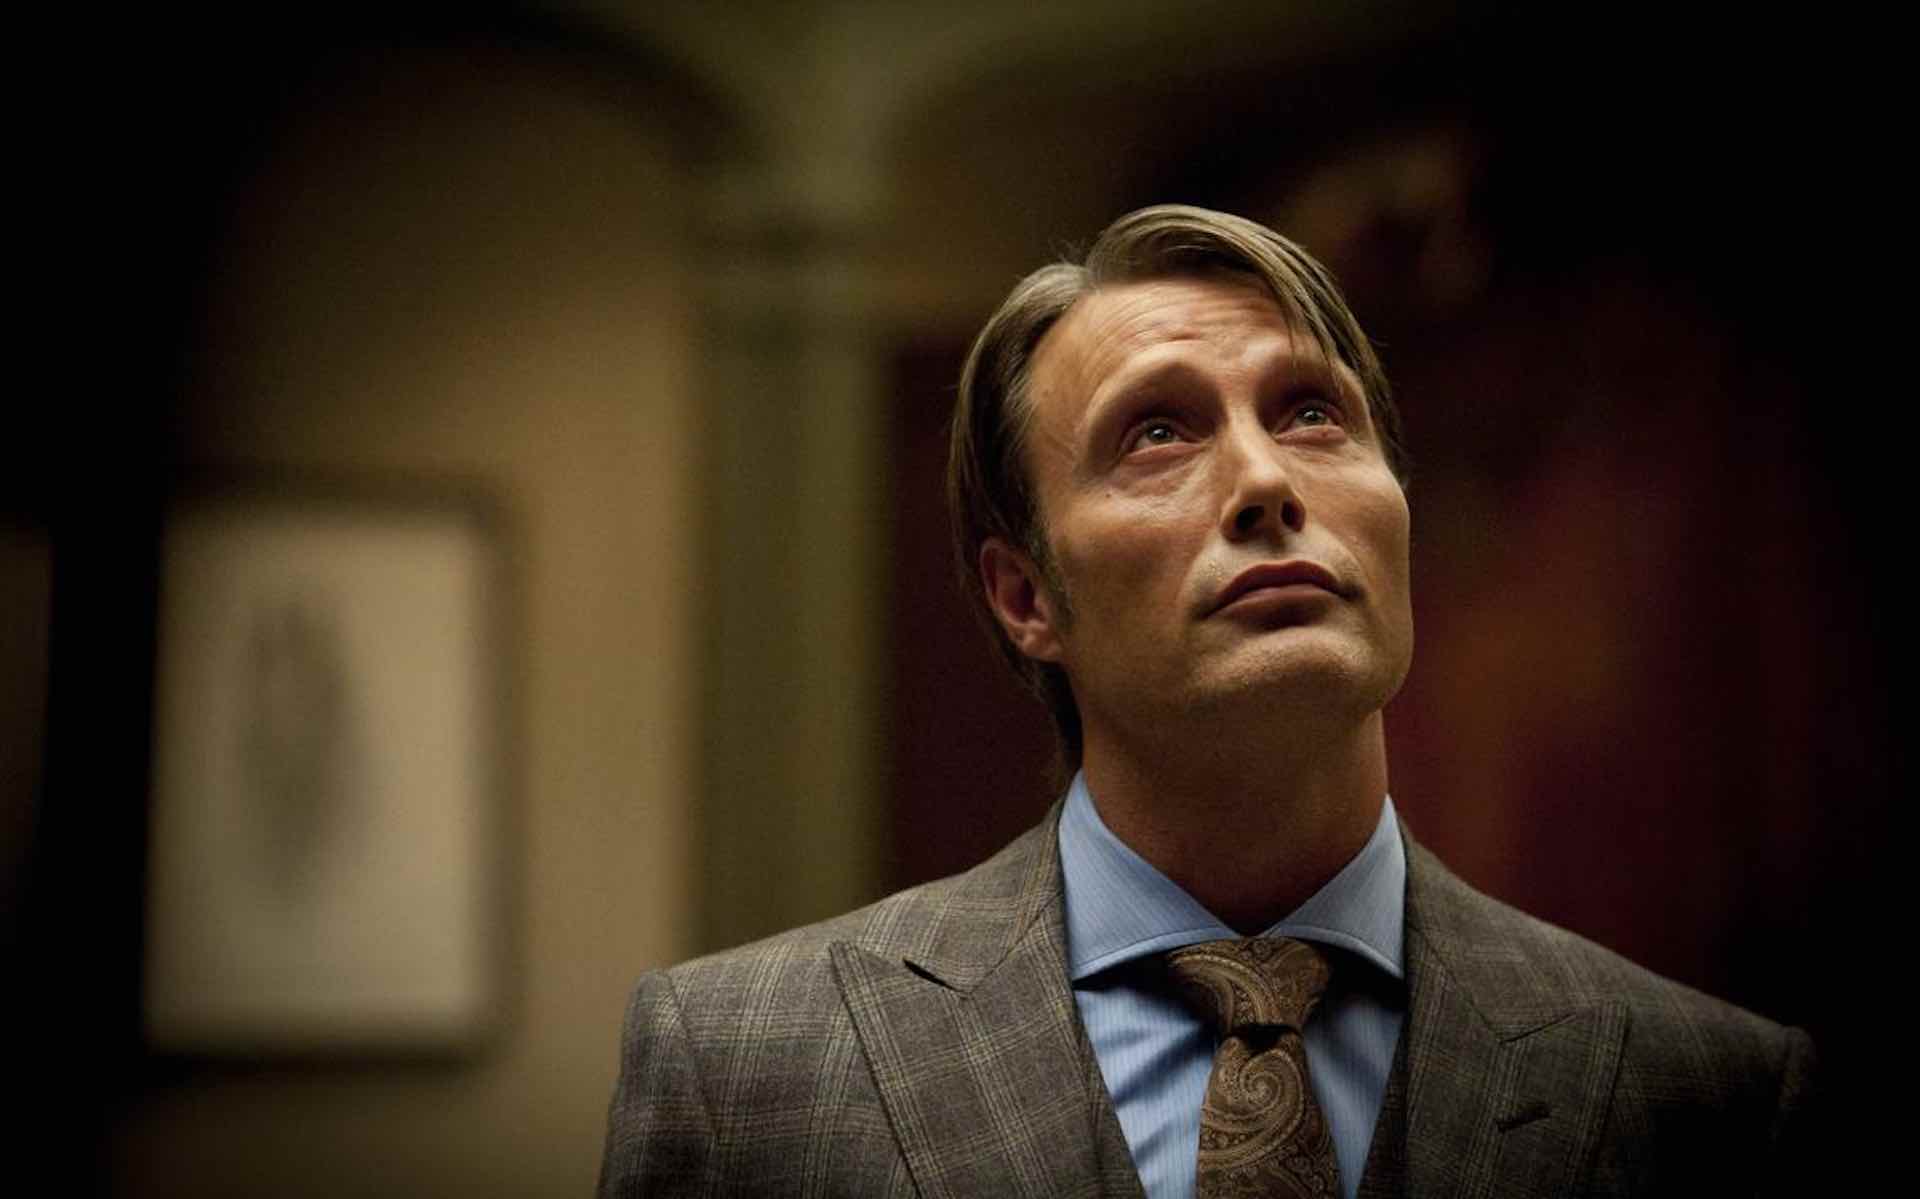 the-hannibal-cast-reunited-everything-to-know-about-season-4-film